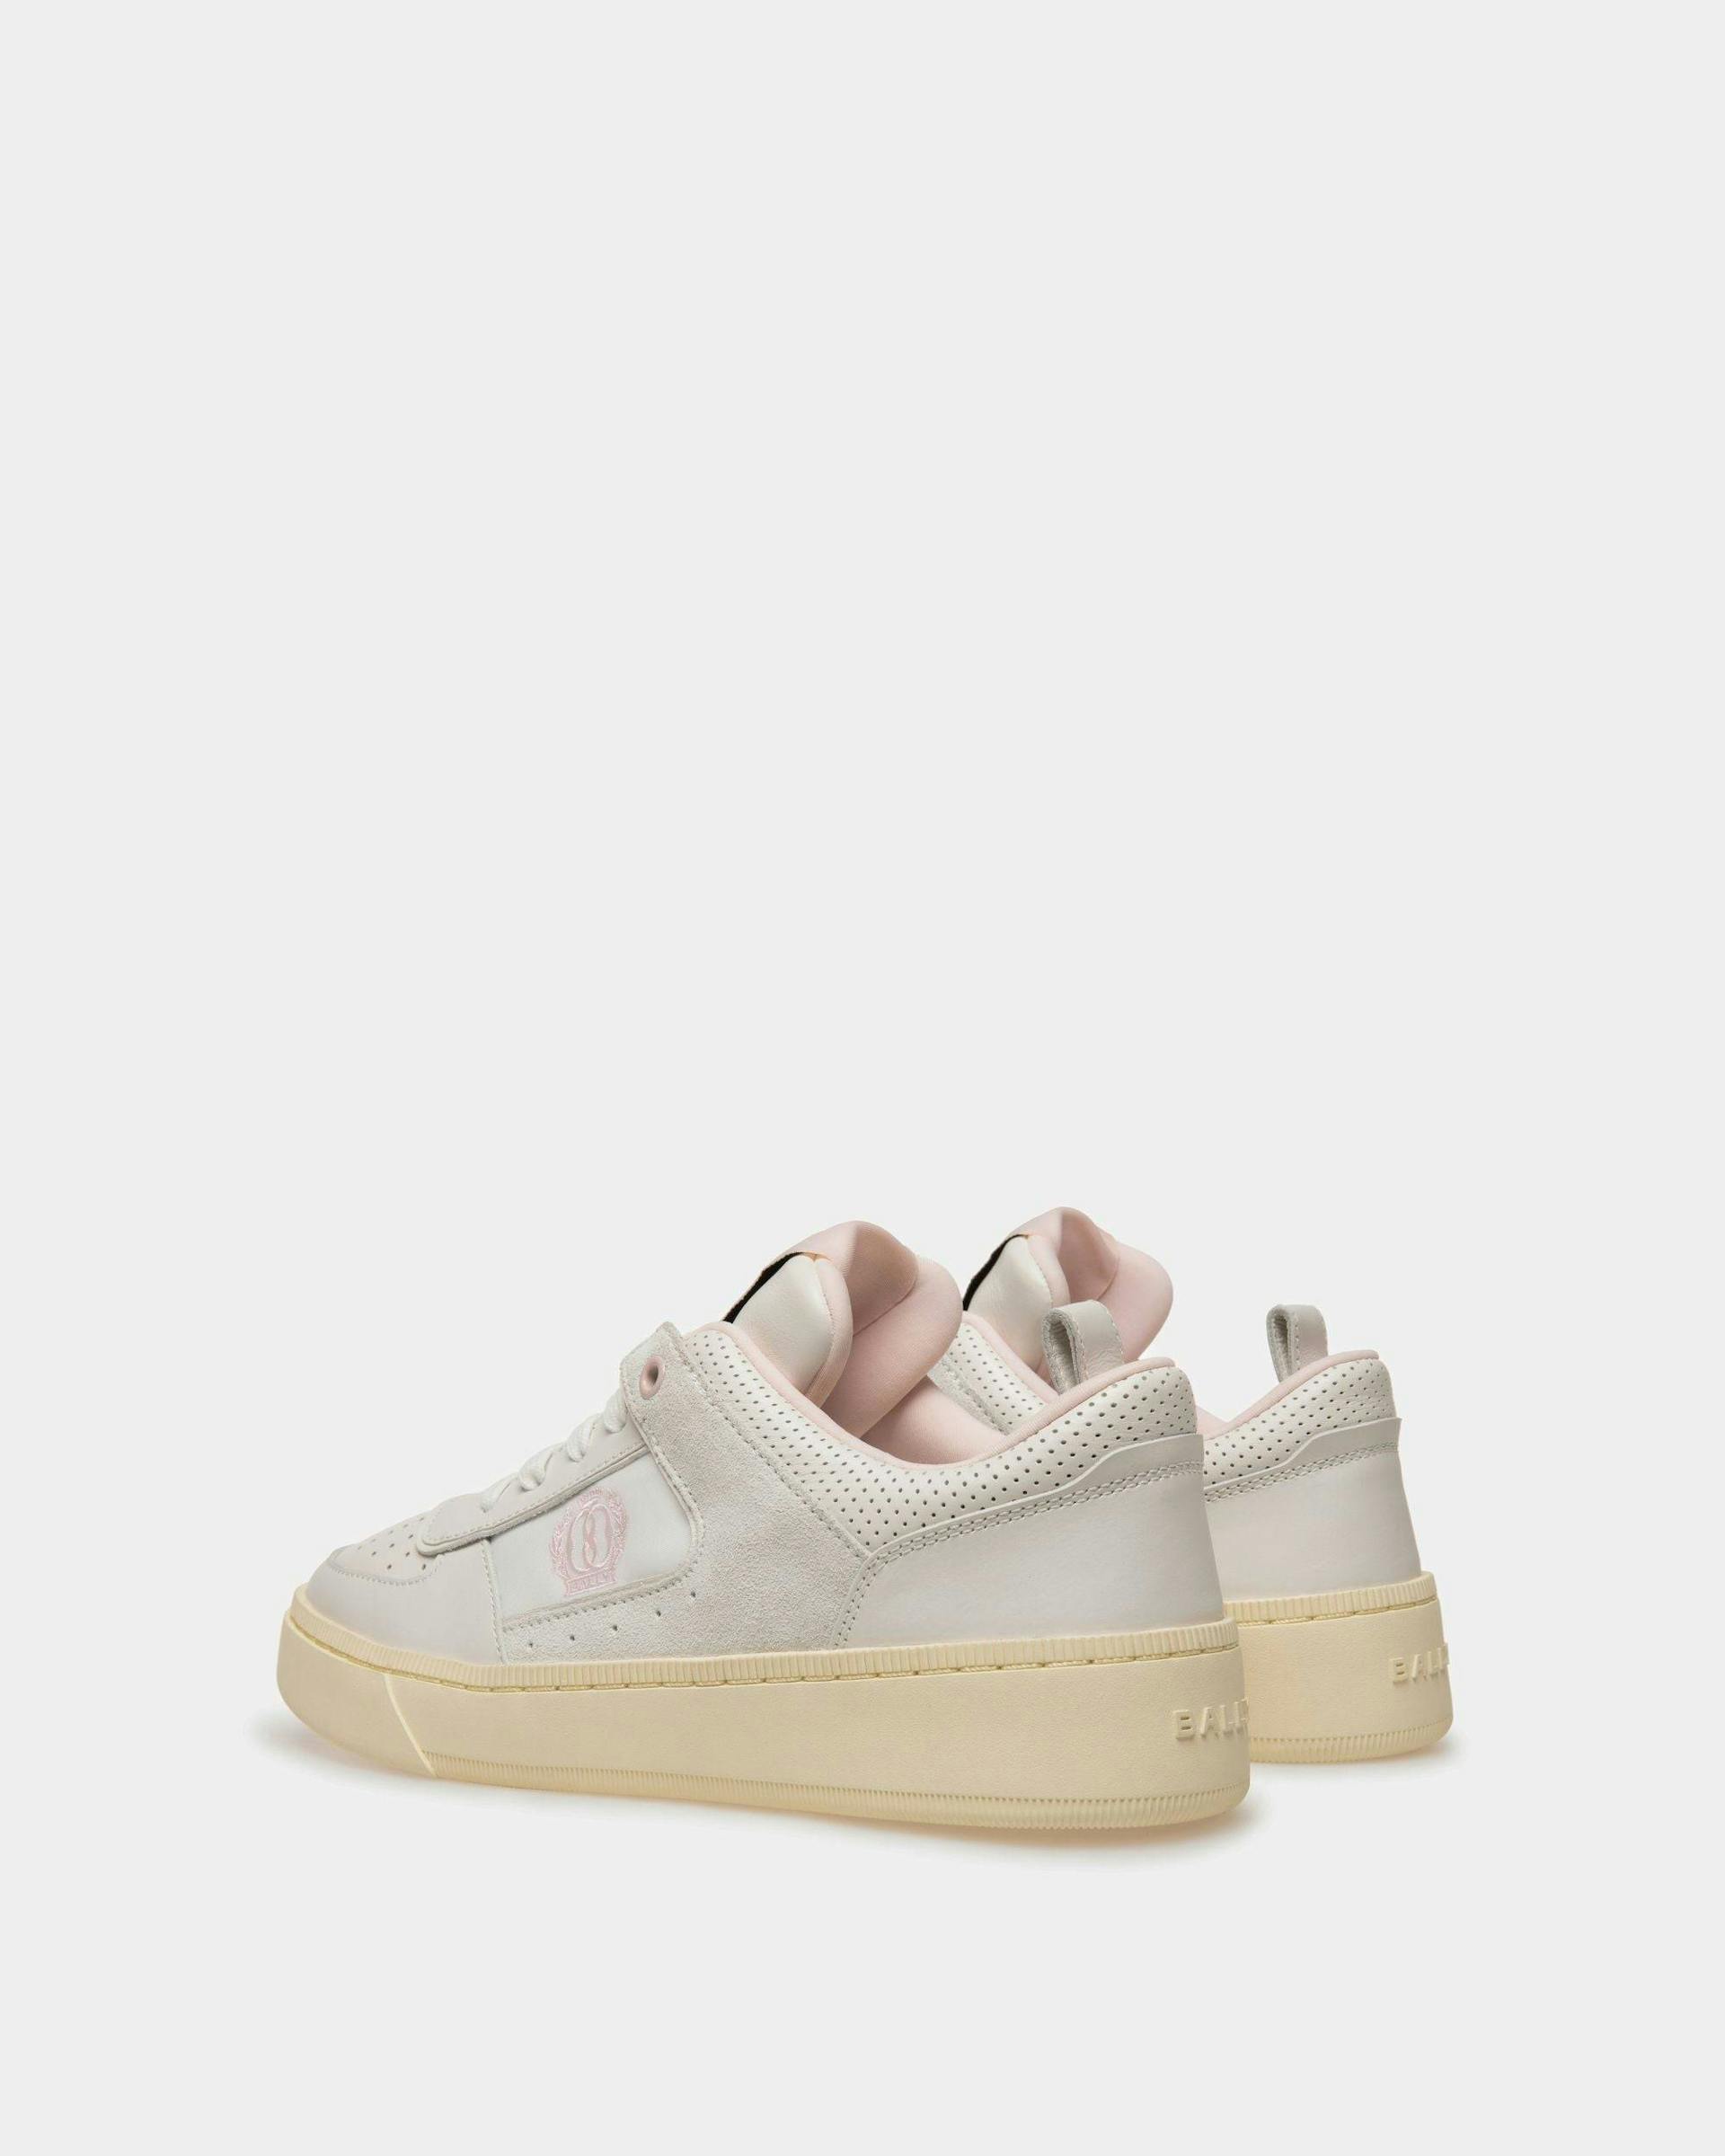 Raise Sneakers In White And Pink Leather - Women's - Bally - 03